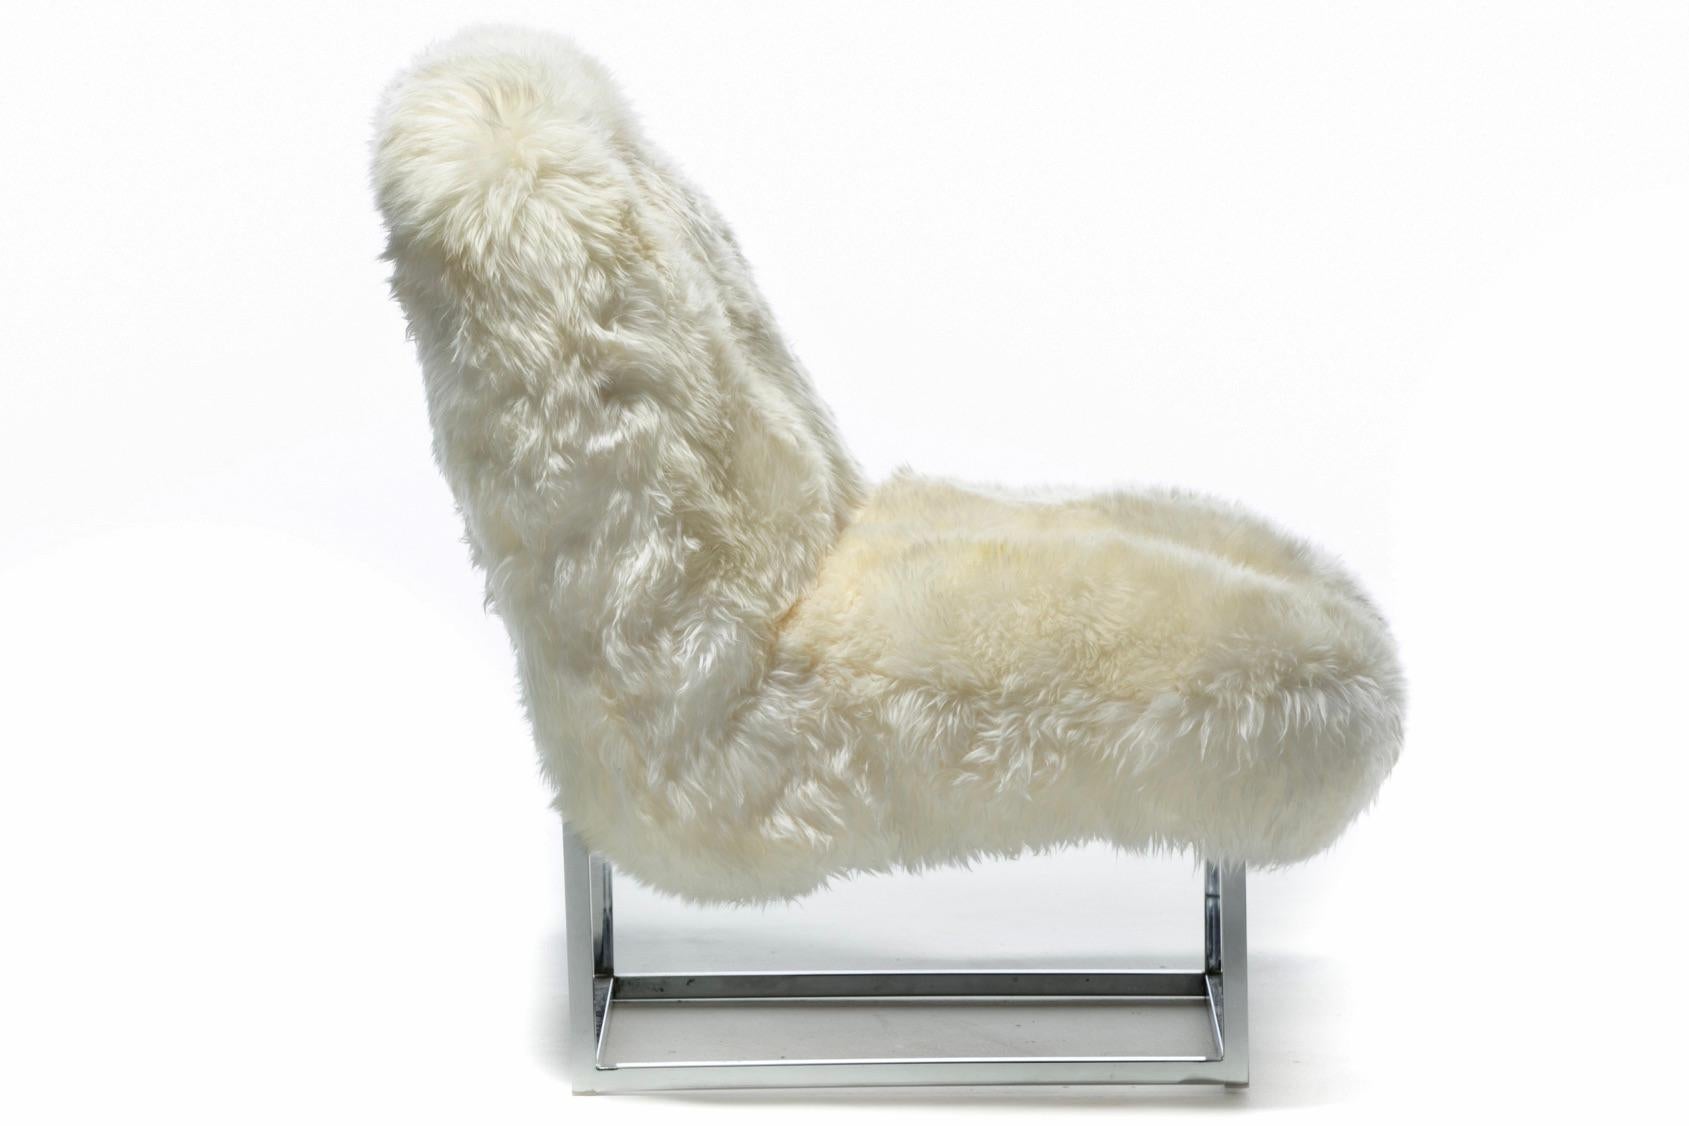 Late 20th Century Pair of Milo Baughman Style Sheepskin & Chrome Slipper Chairs c. 1970s For Sale